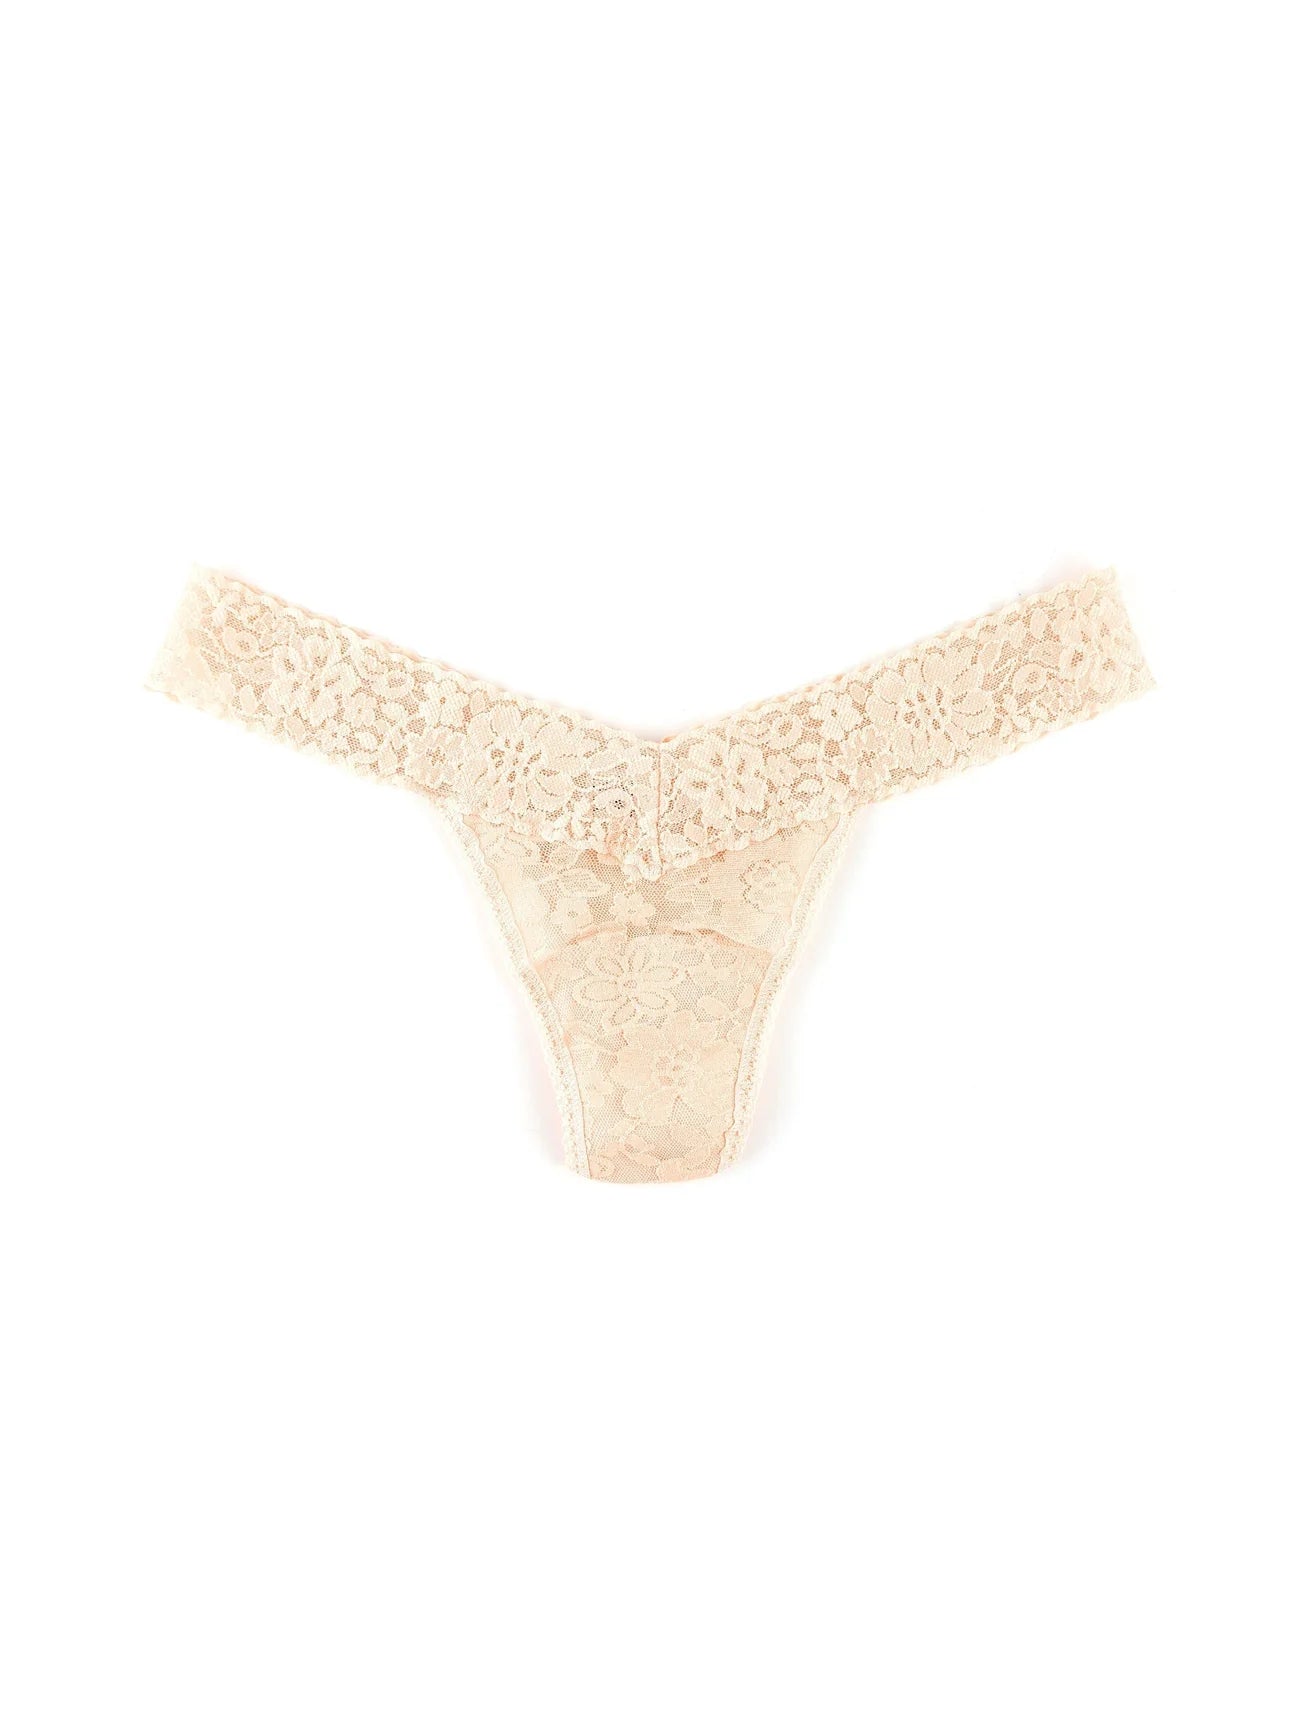 Signature Lace Low Rise Thong In Vanilla by Hanky Panky – My Bare